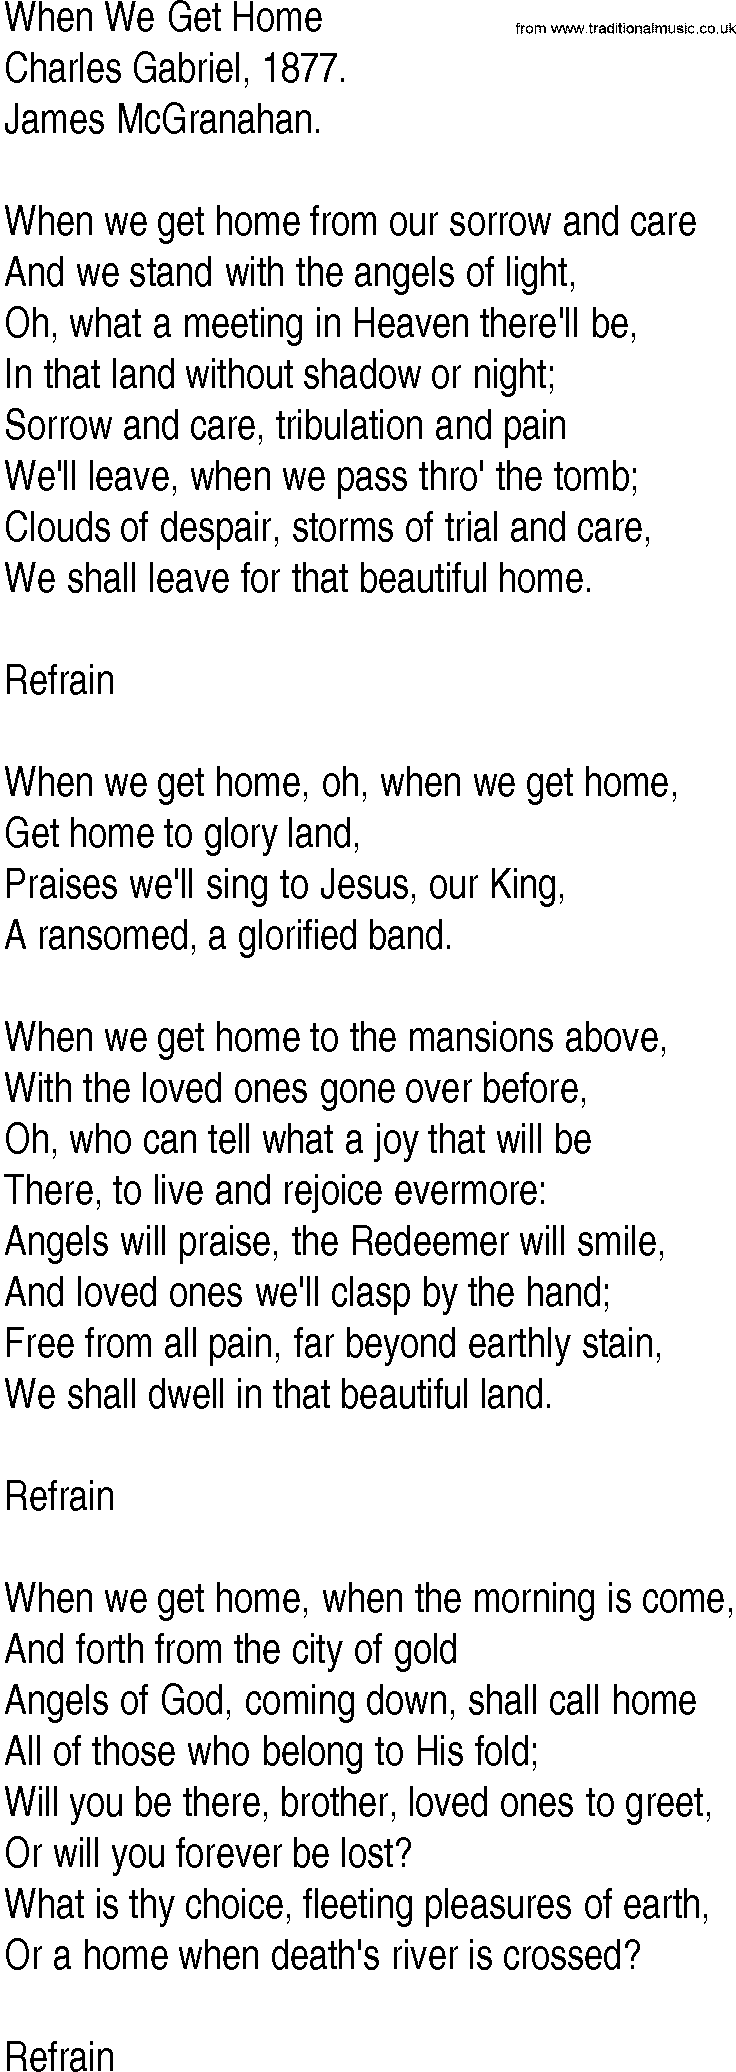 Hymn and Gospel Song: When We Get Home by Charles Gabriel lyrics